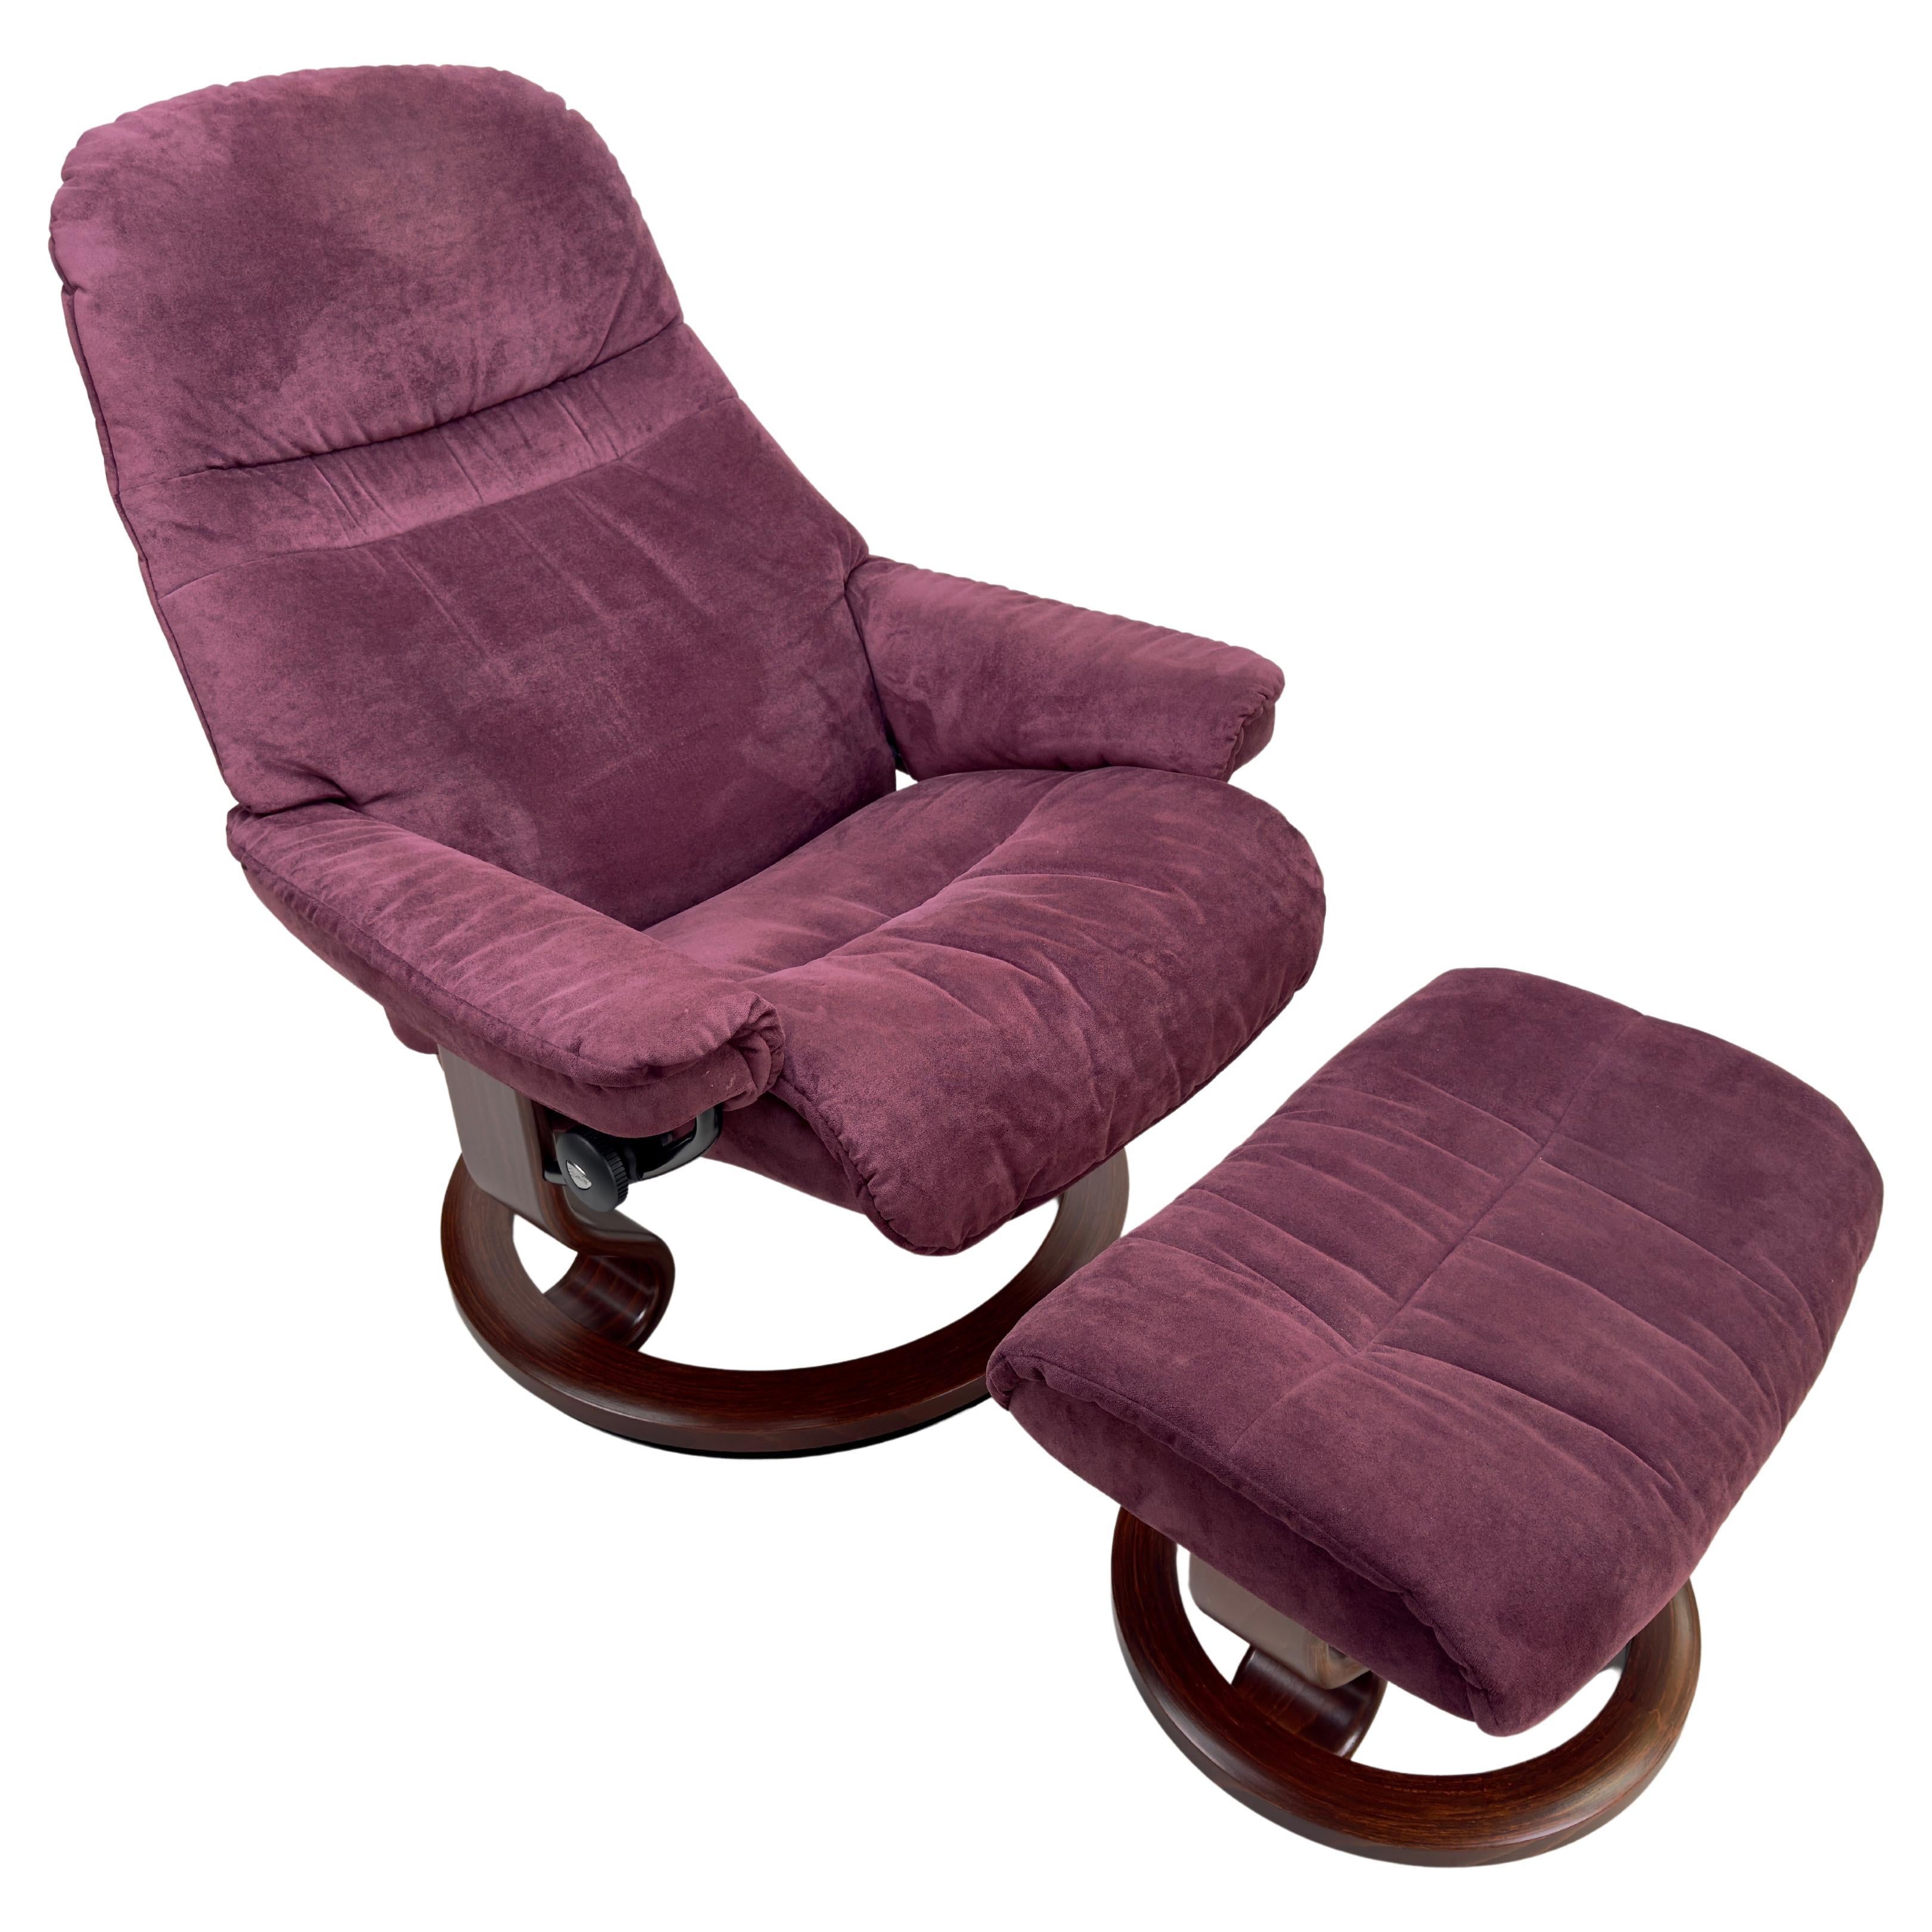 What was the first reclining chair?